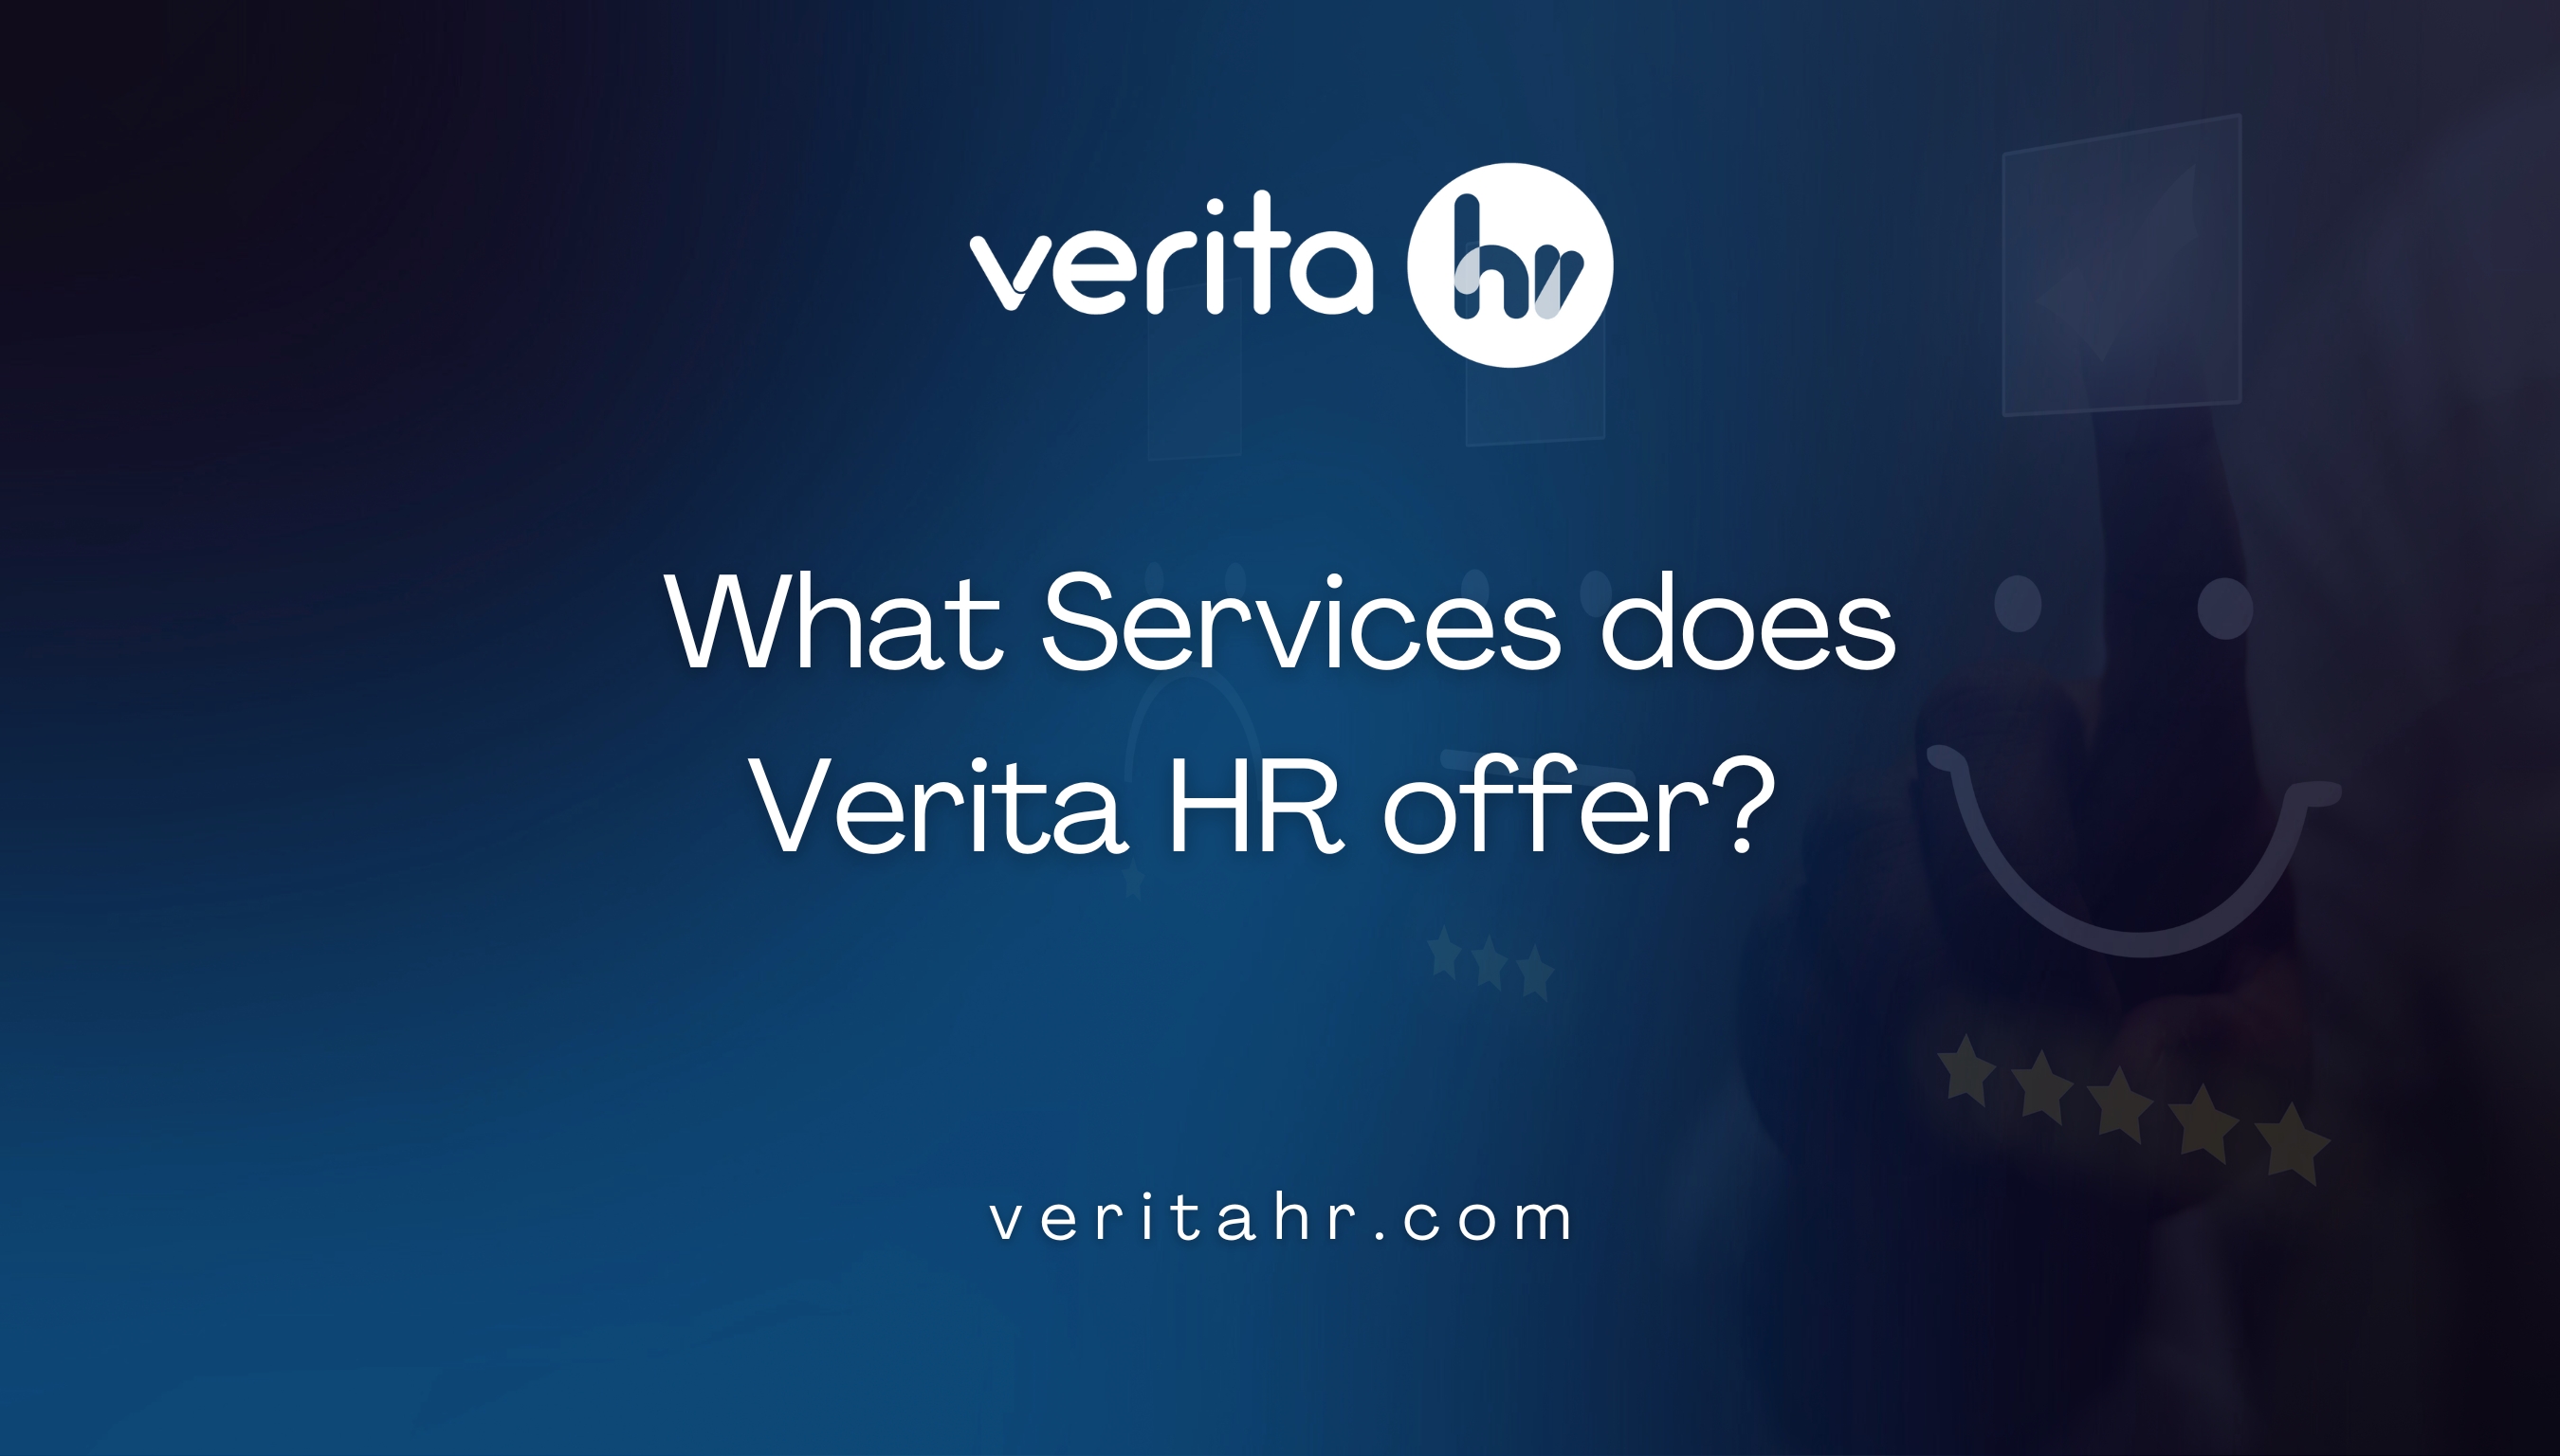 What Services does Verita HR offer?